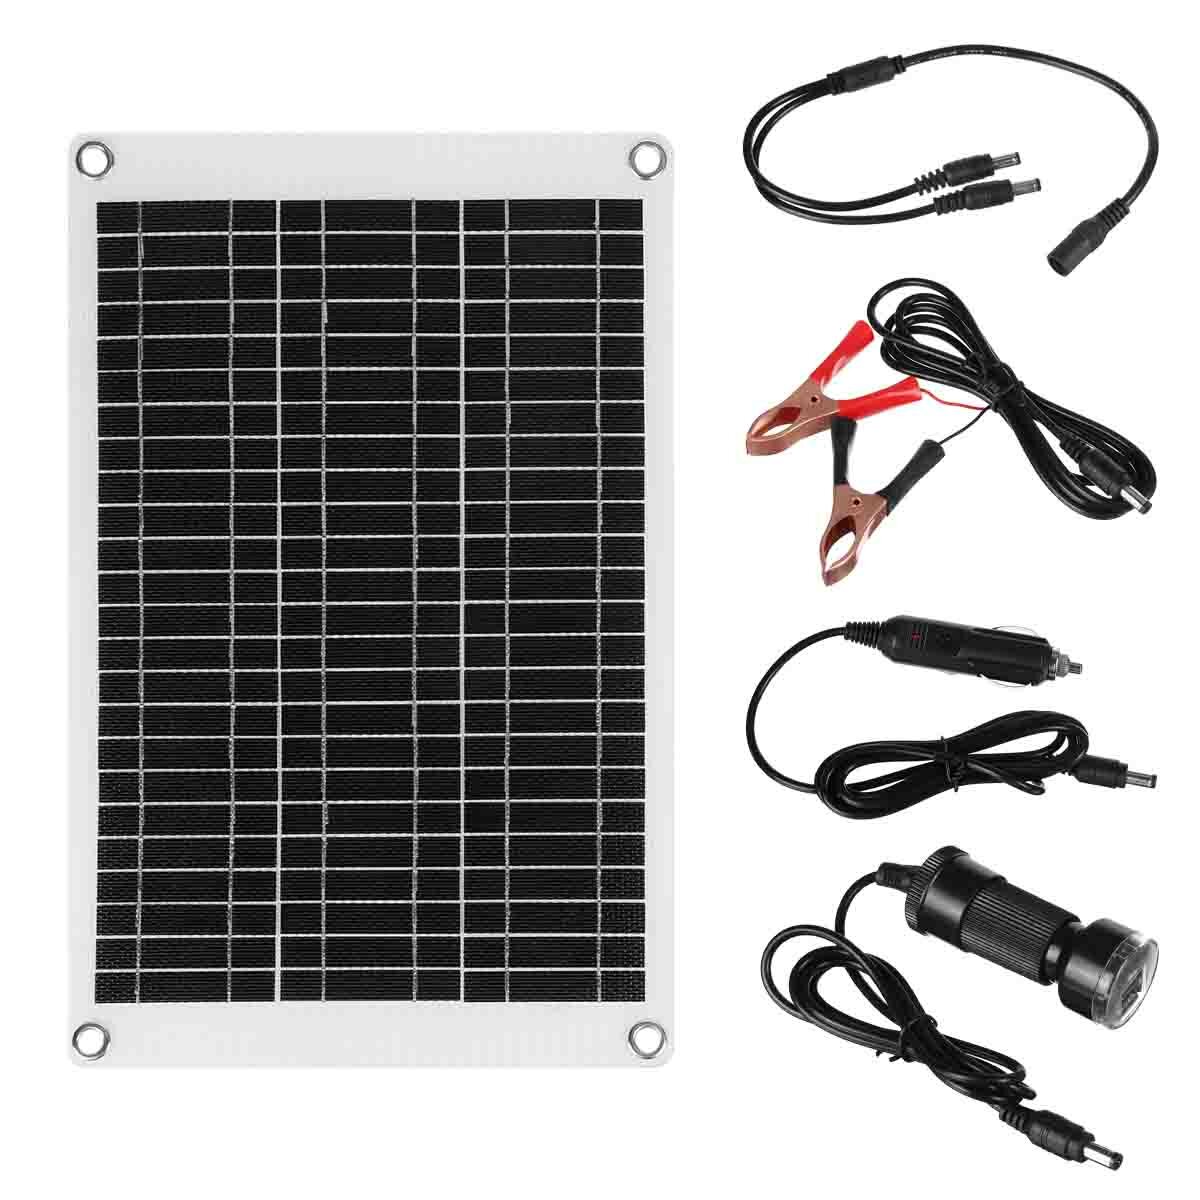 100W 12V ETFE Solar Panel Kit Phone Car Battery Charger System For Home Outdoor Camping